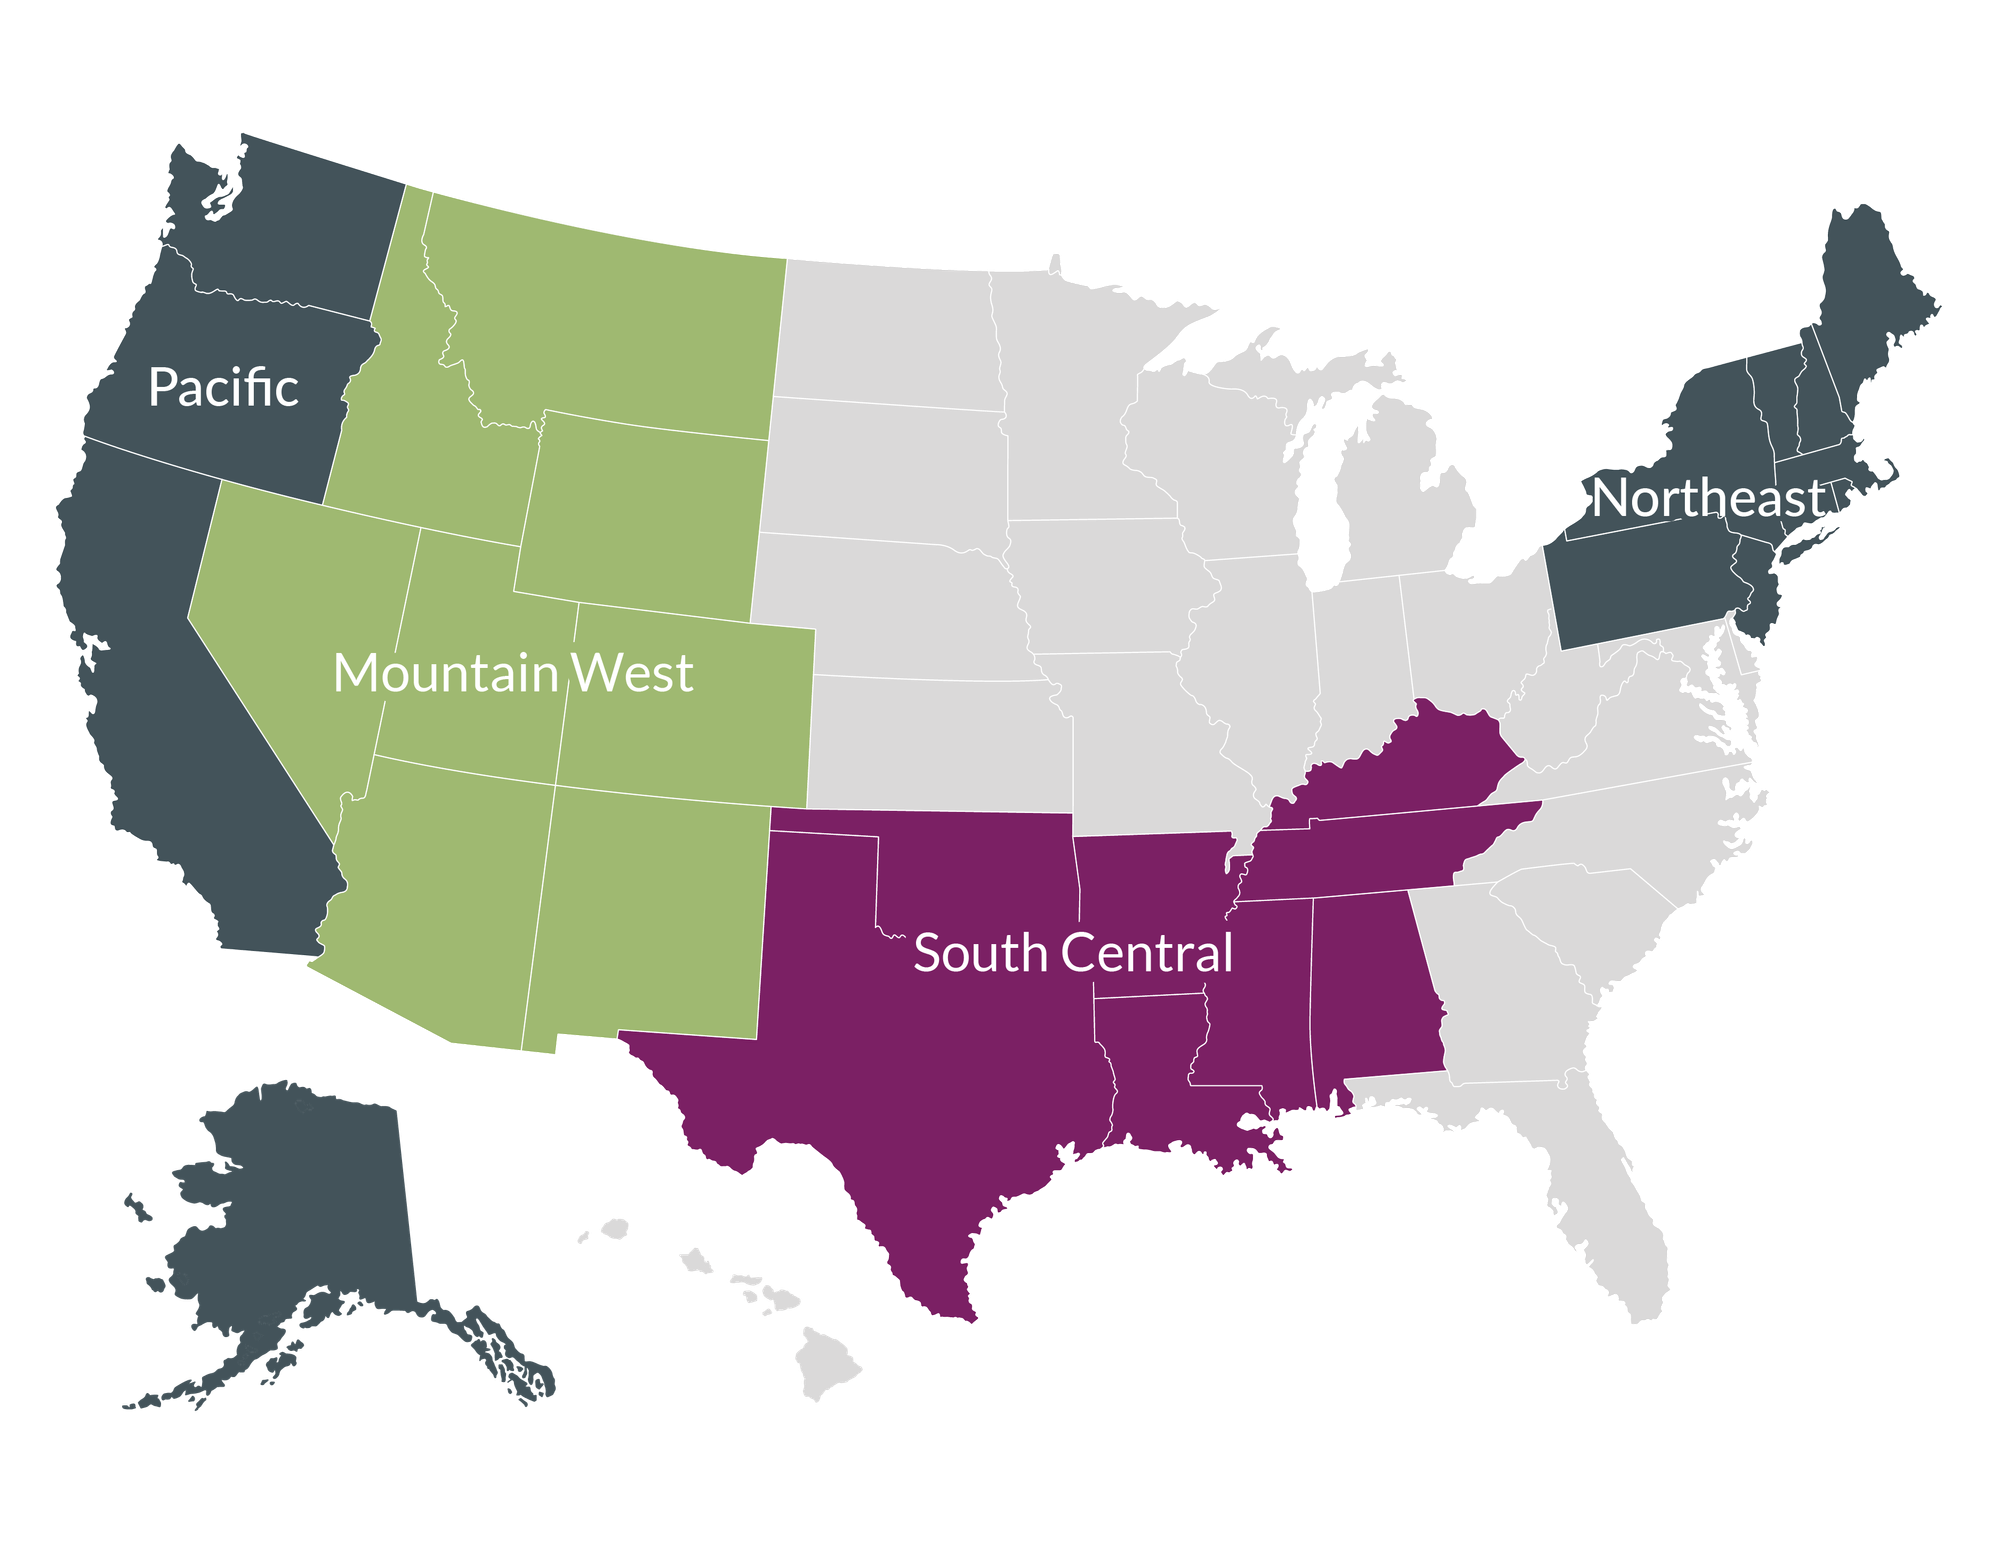 Map of the United States - Pacific, Mountain West, South Central, and Northeast regions identified